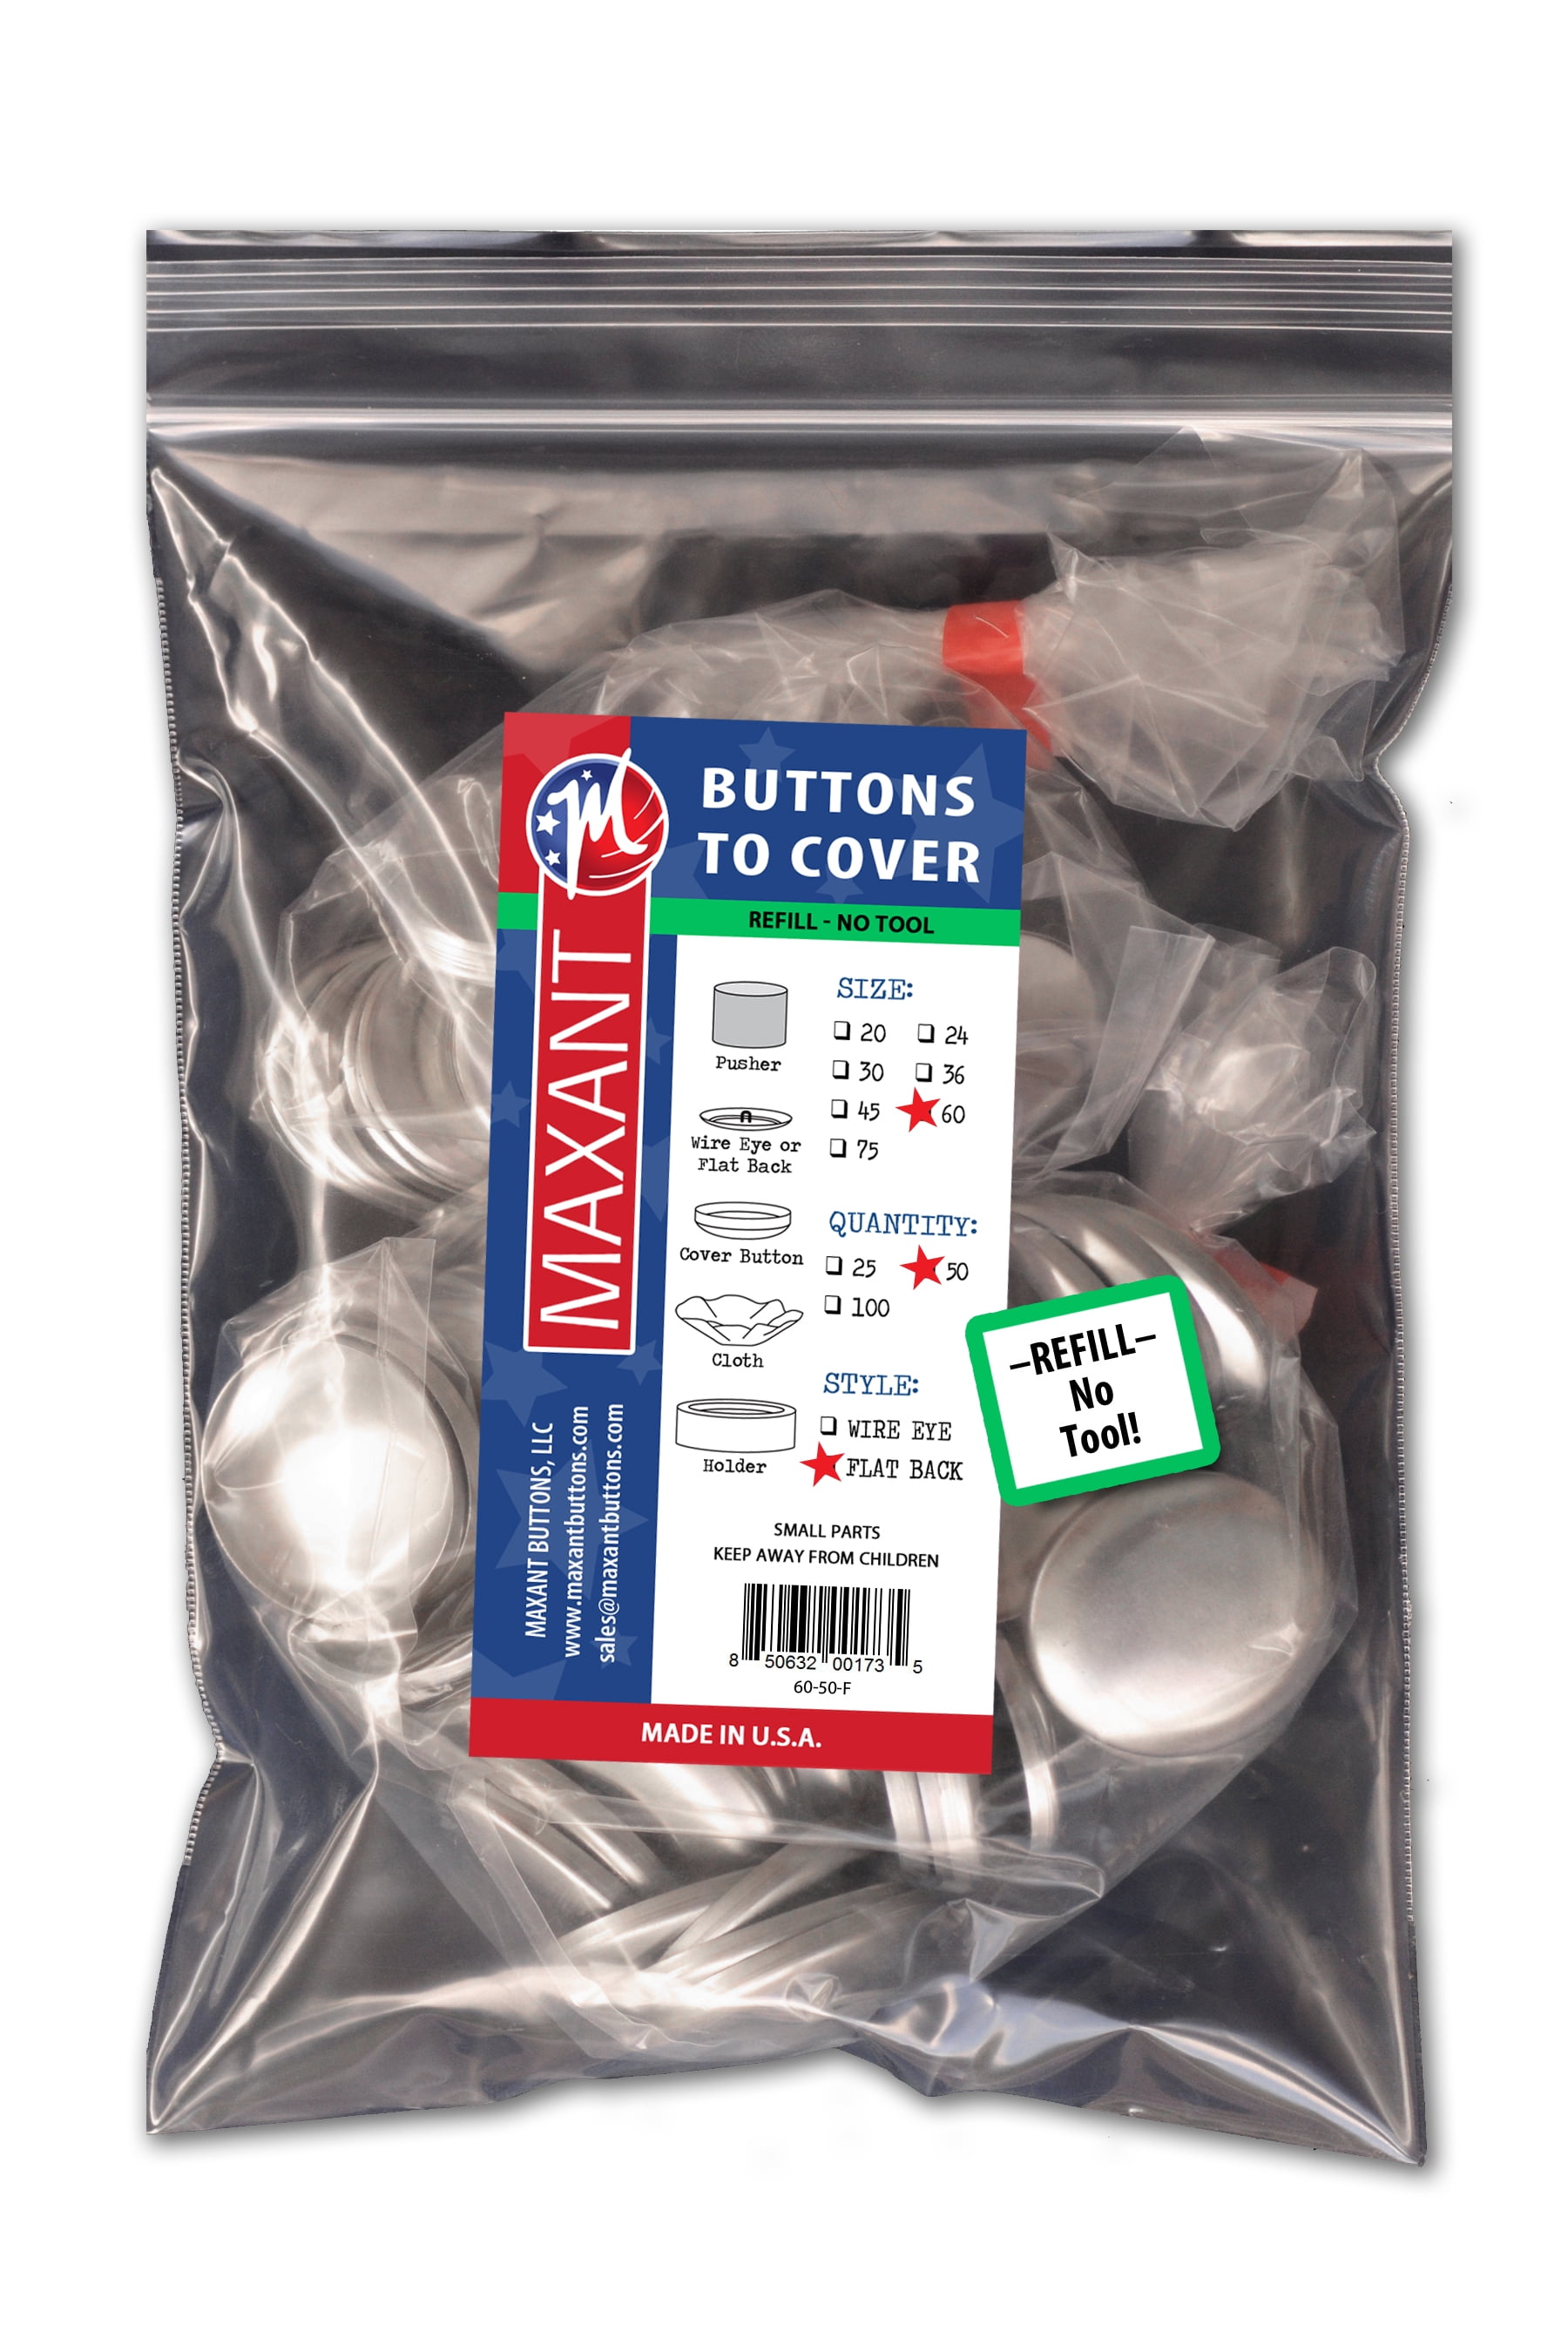 with Tool 22mm Made in USA Self Cover Buttons with Flat Backs 100 Buttons to Cover Size 36